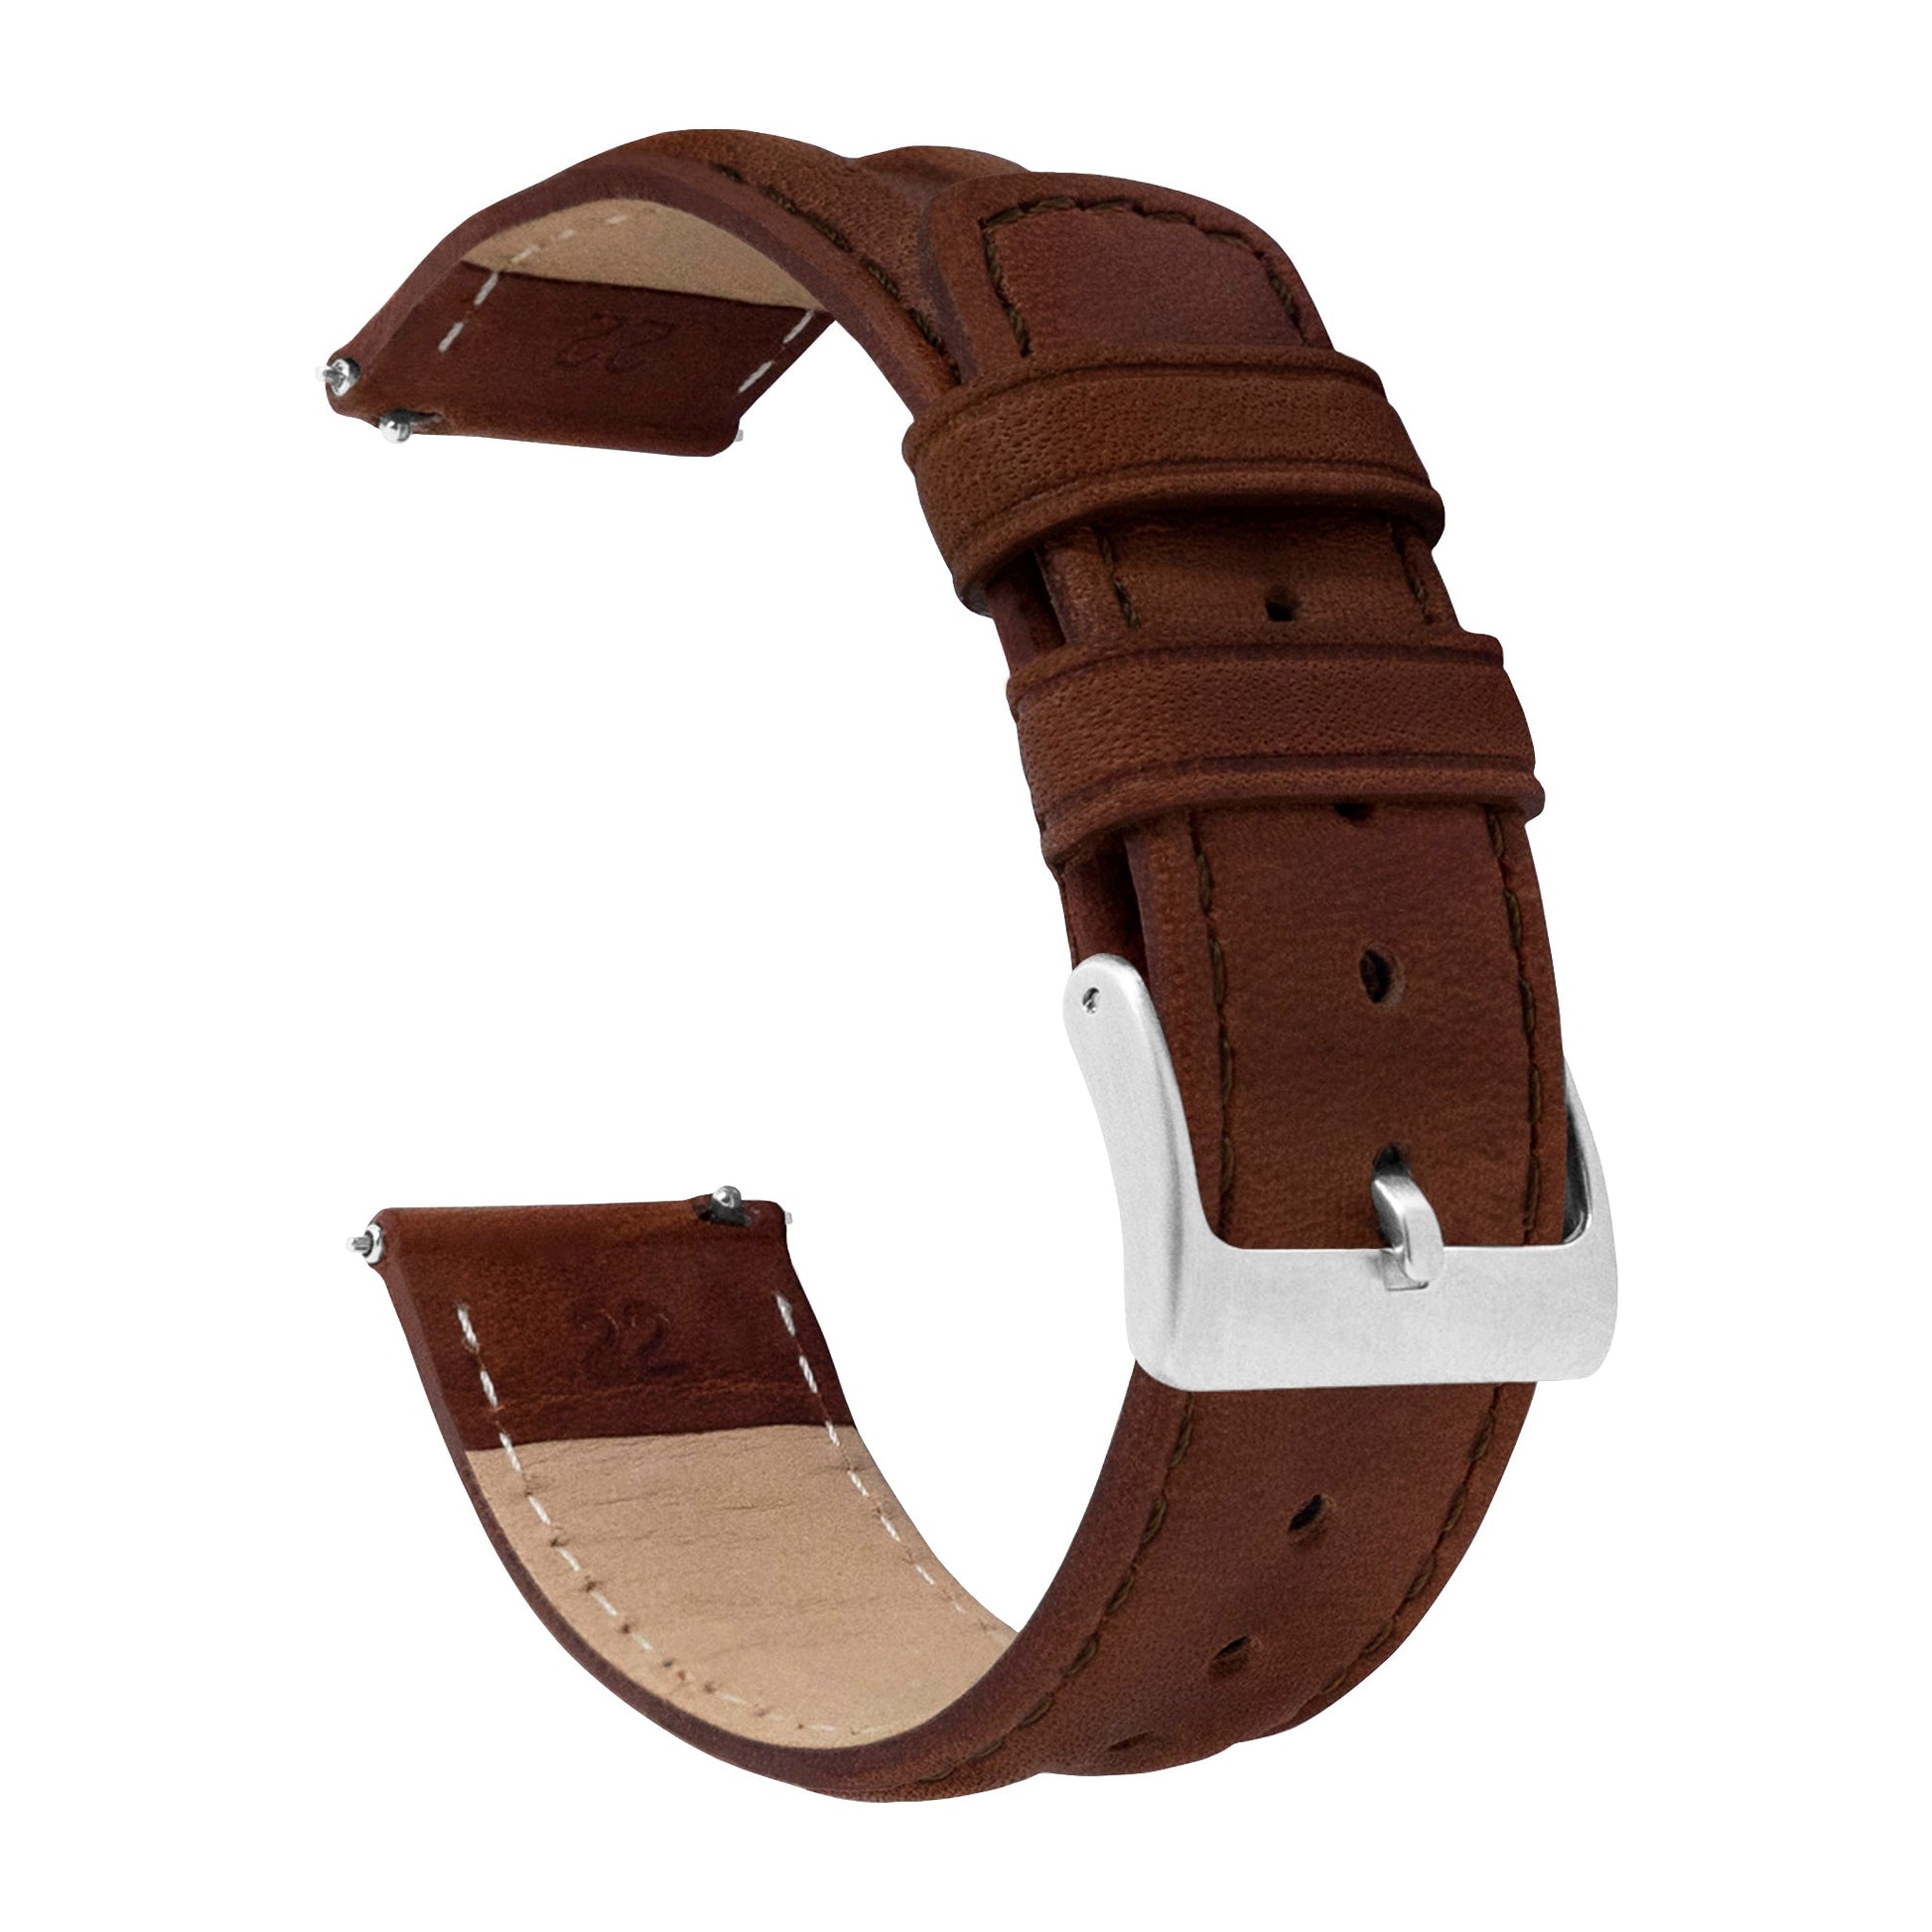 Samsung Galaxy Watch3 | Classic Horween Leather | Chocolate Brown - Barton Watch Bands